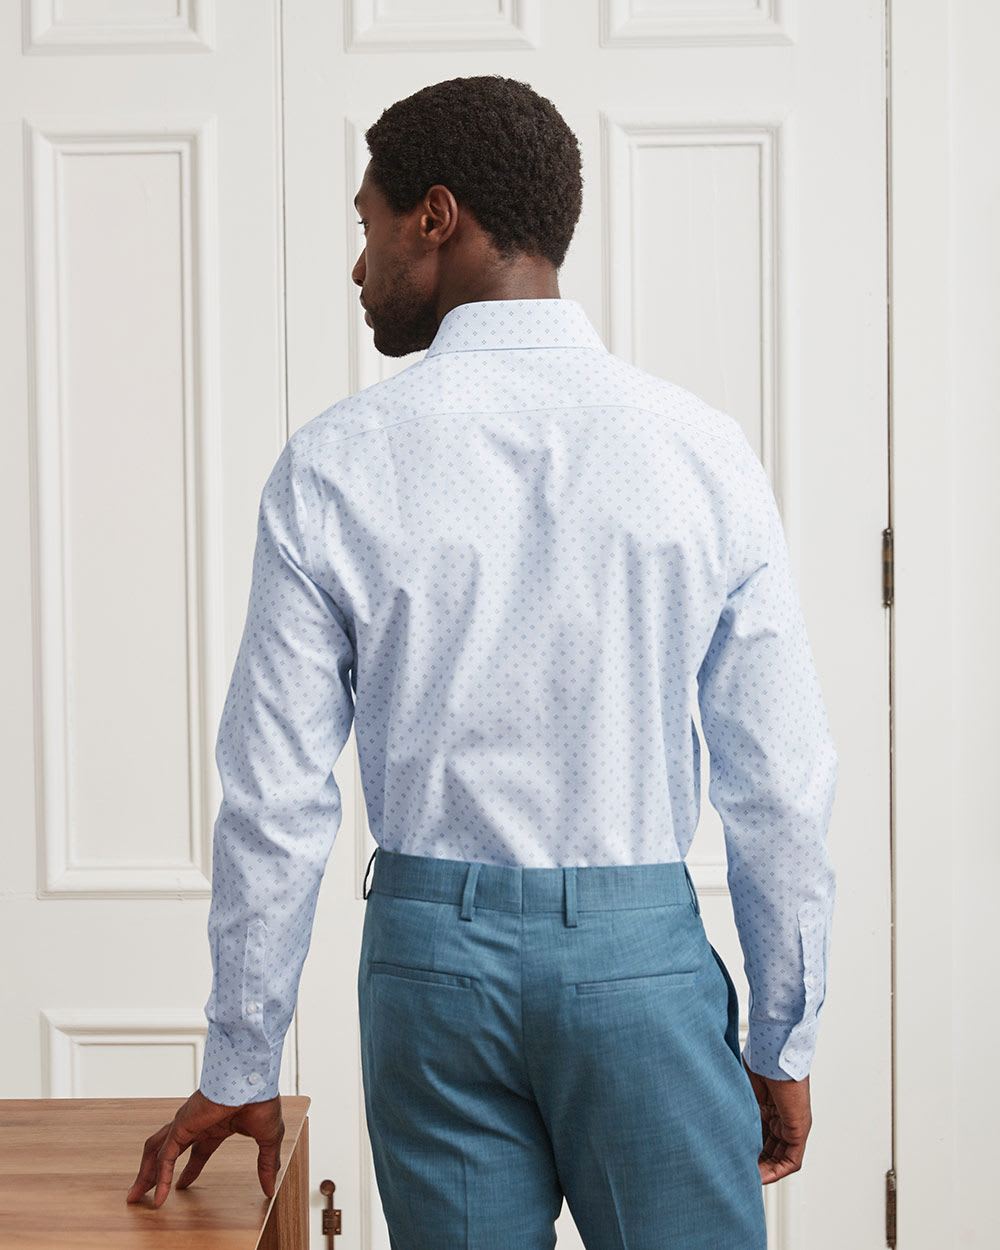 Tailored Fit Blue Dress Shirt with Geometric Pattern